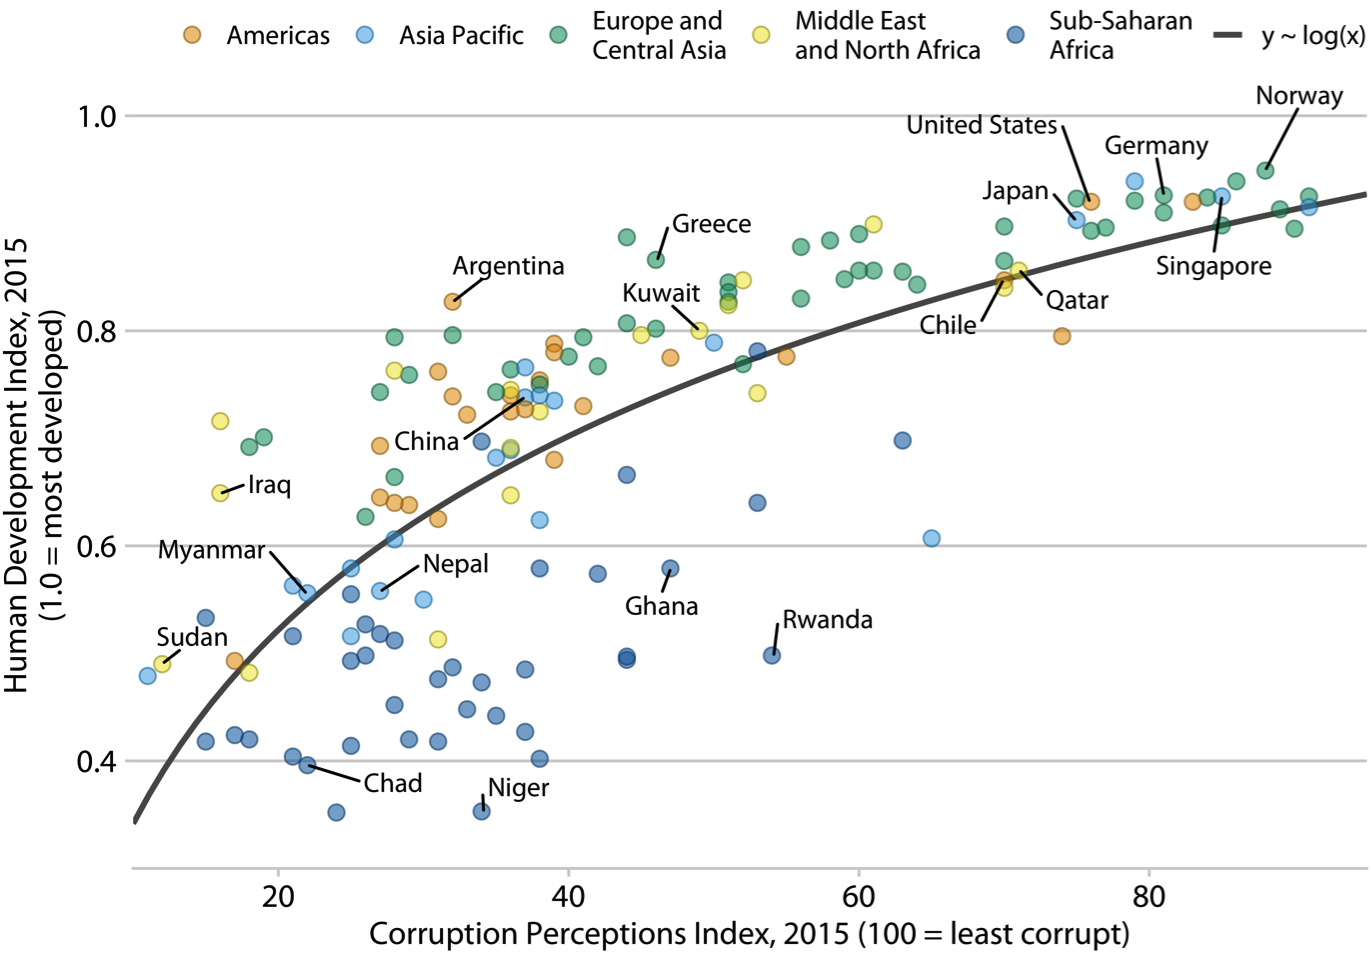 Corruption and human development: The most developed countries experience the least corruption. This figure was inspired by a posting in The Economist online (2011). Data sources: Transparency International & UN Human Development Report